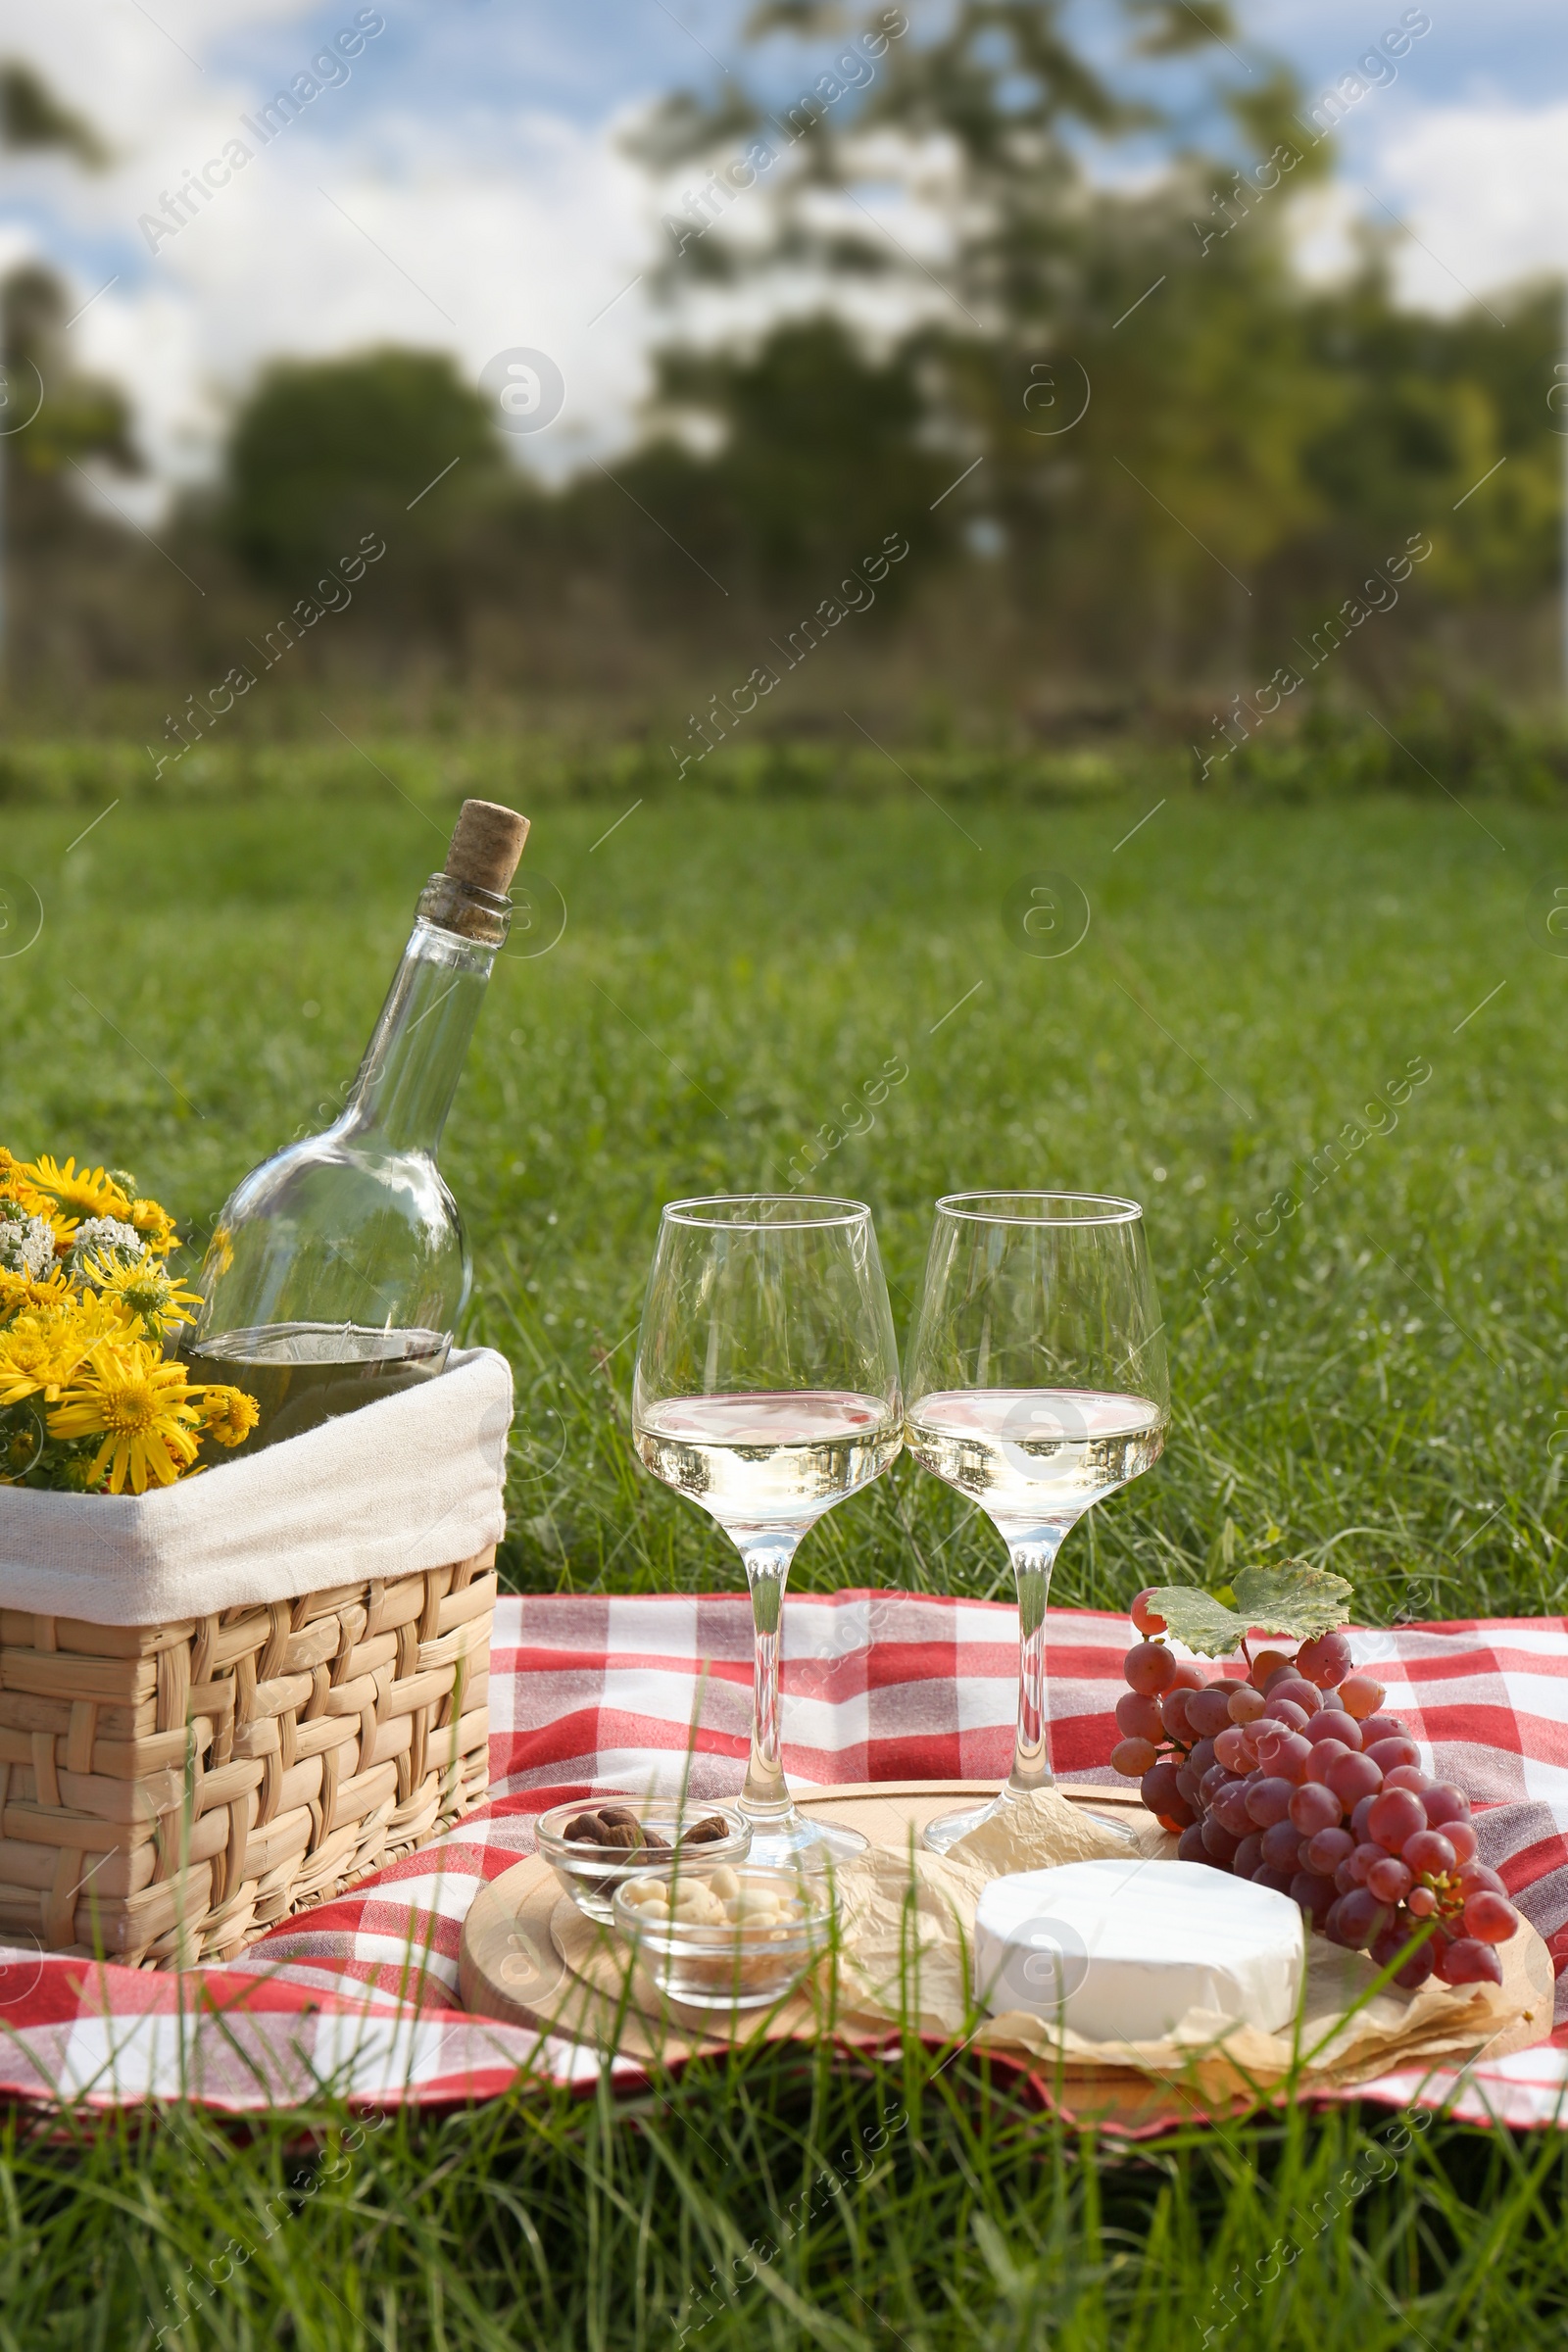 Photo of Glasses of white wine and snacks for picnic served on blanket in park